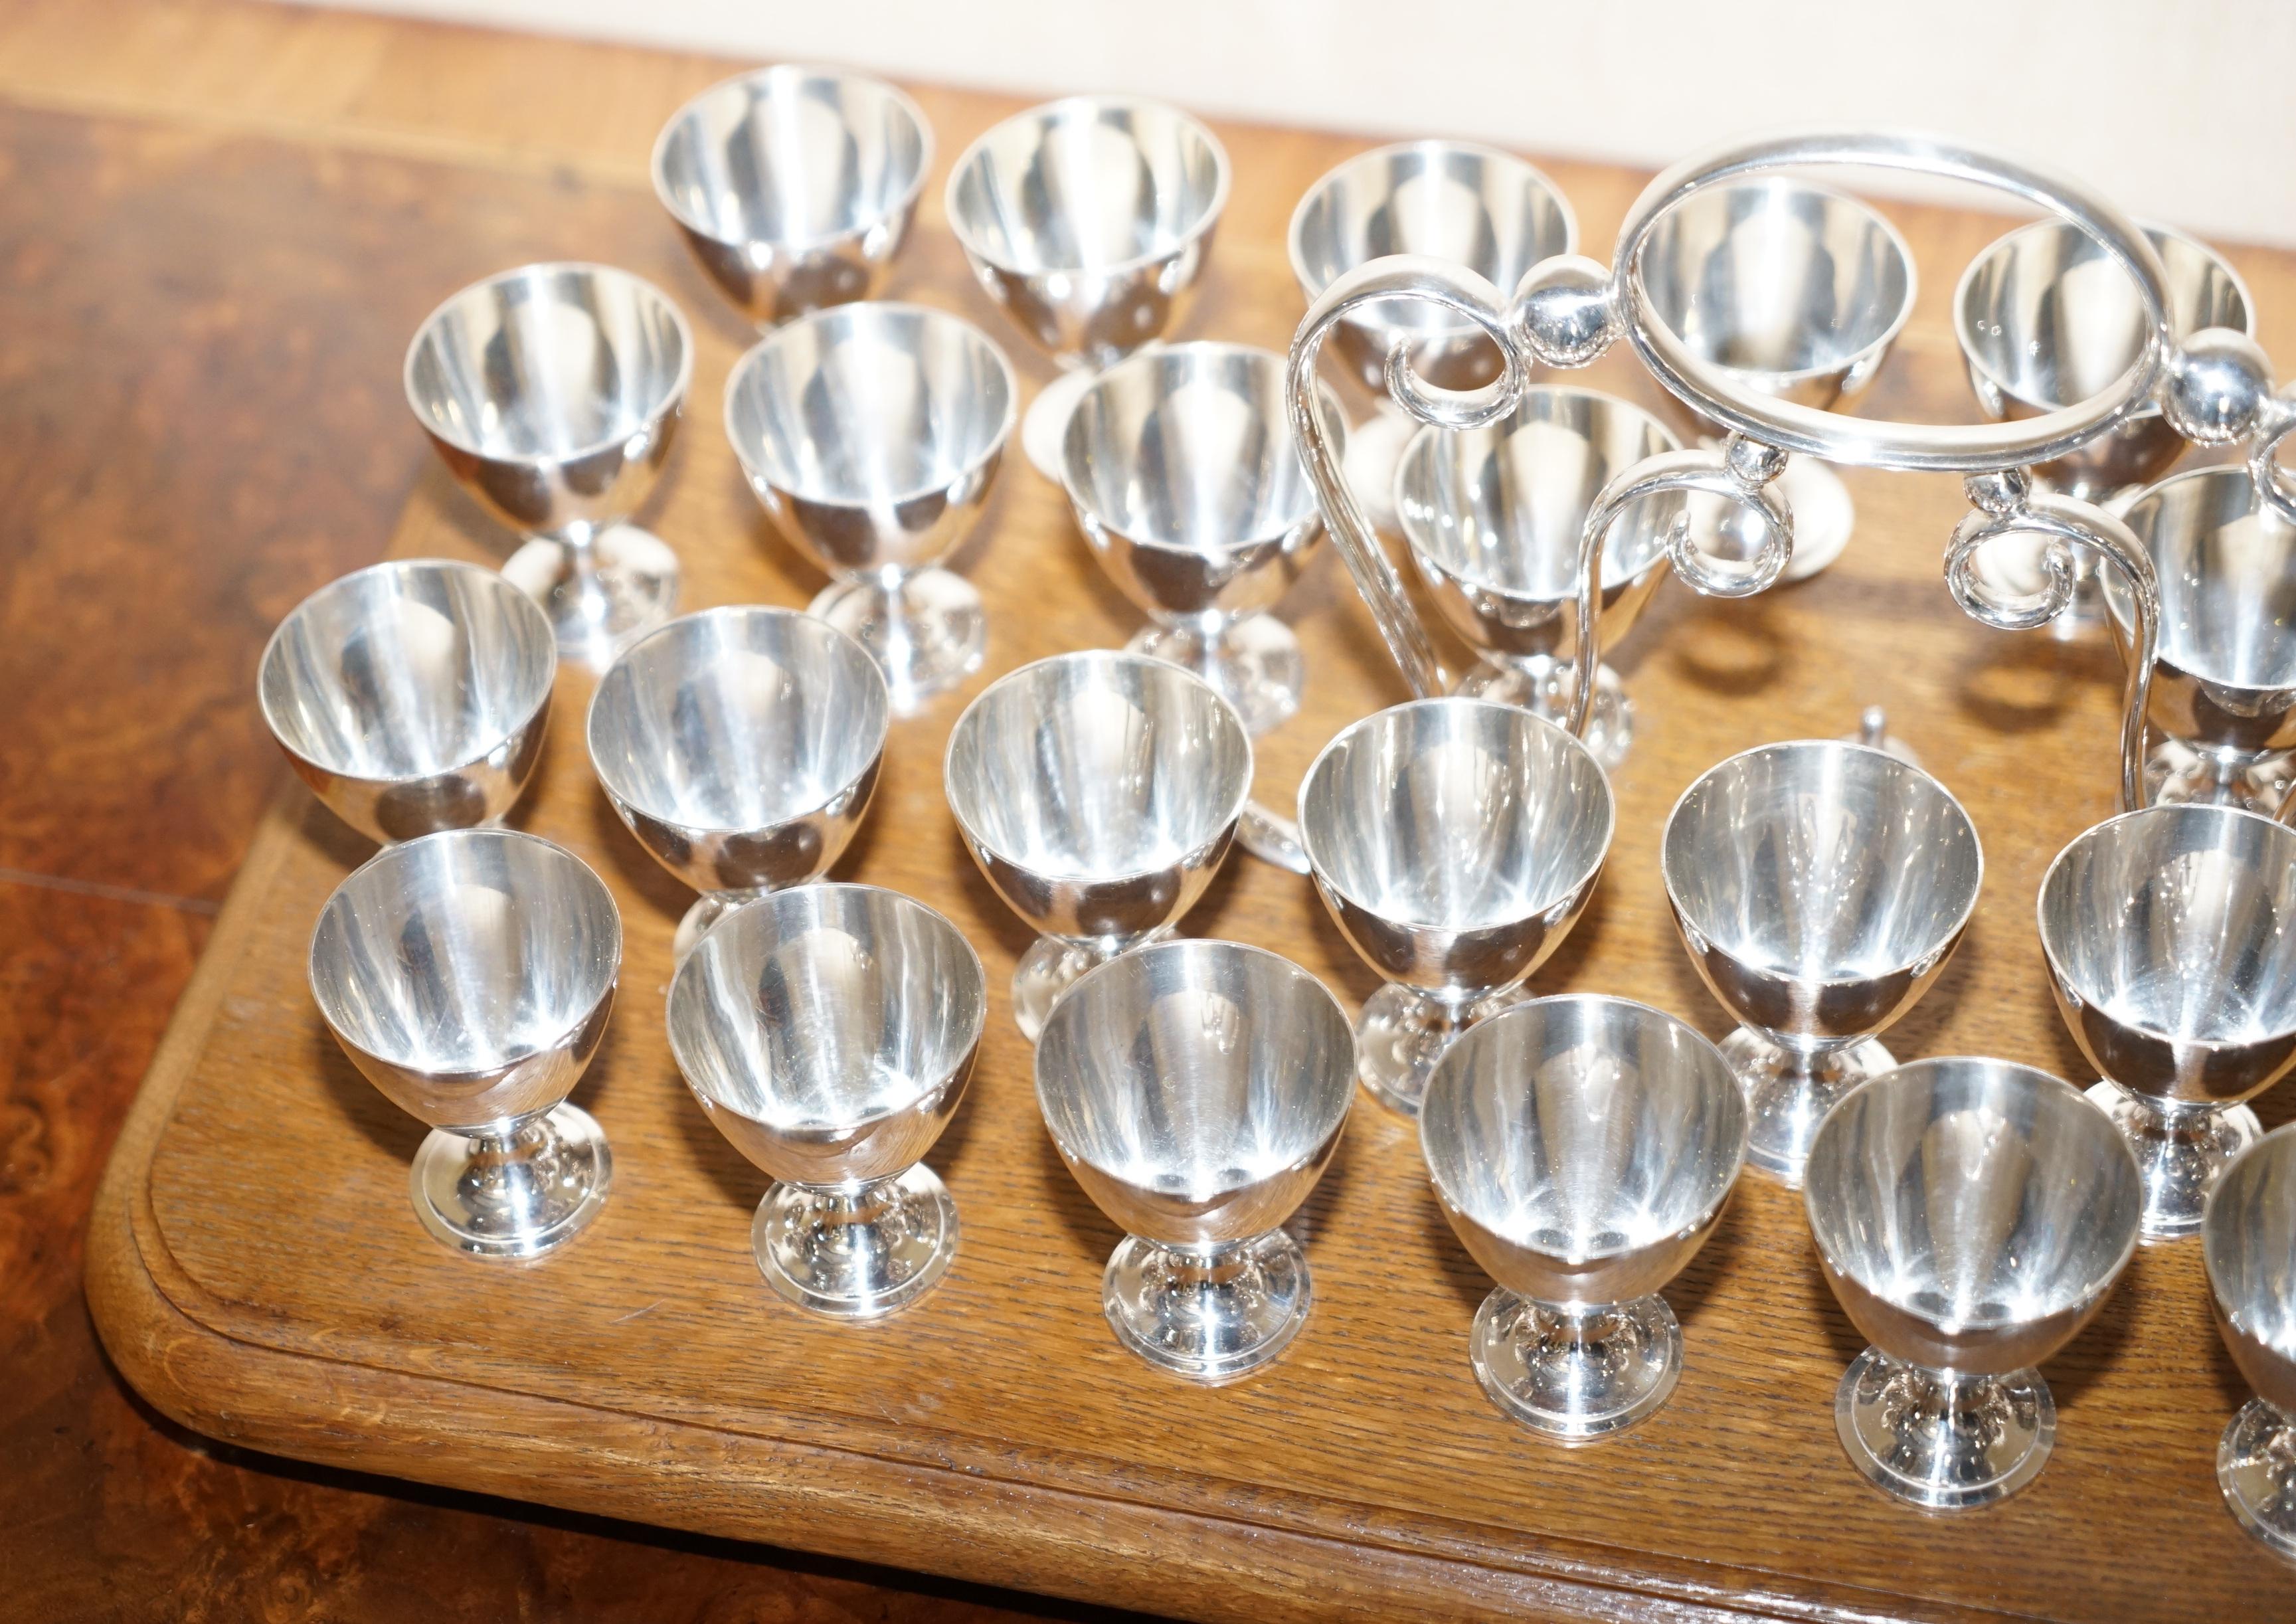 Other Antique Tray with 33 EPNS Shot Cups / Glasses on Originally for Communions For Sale